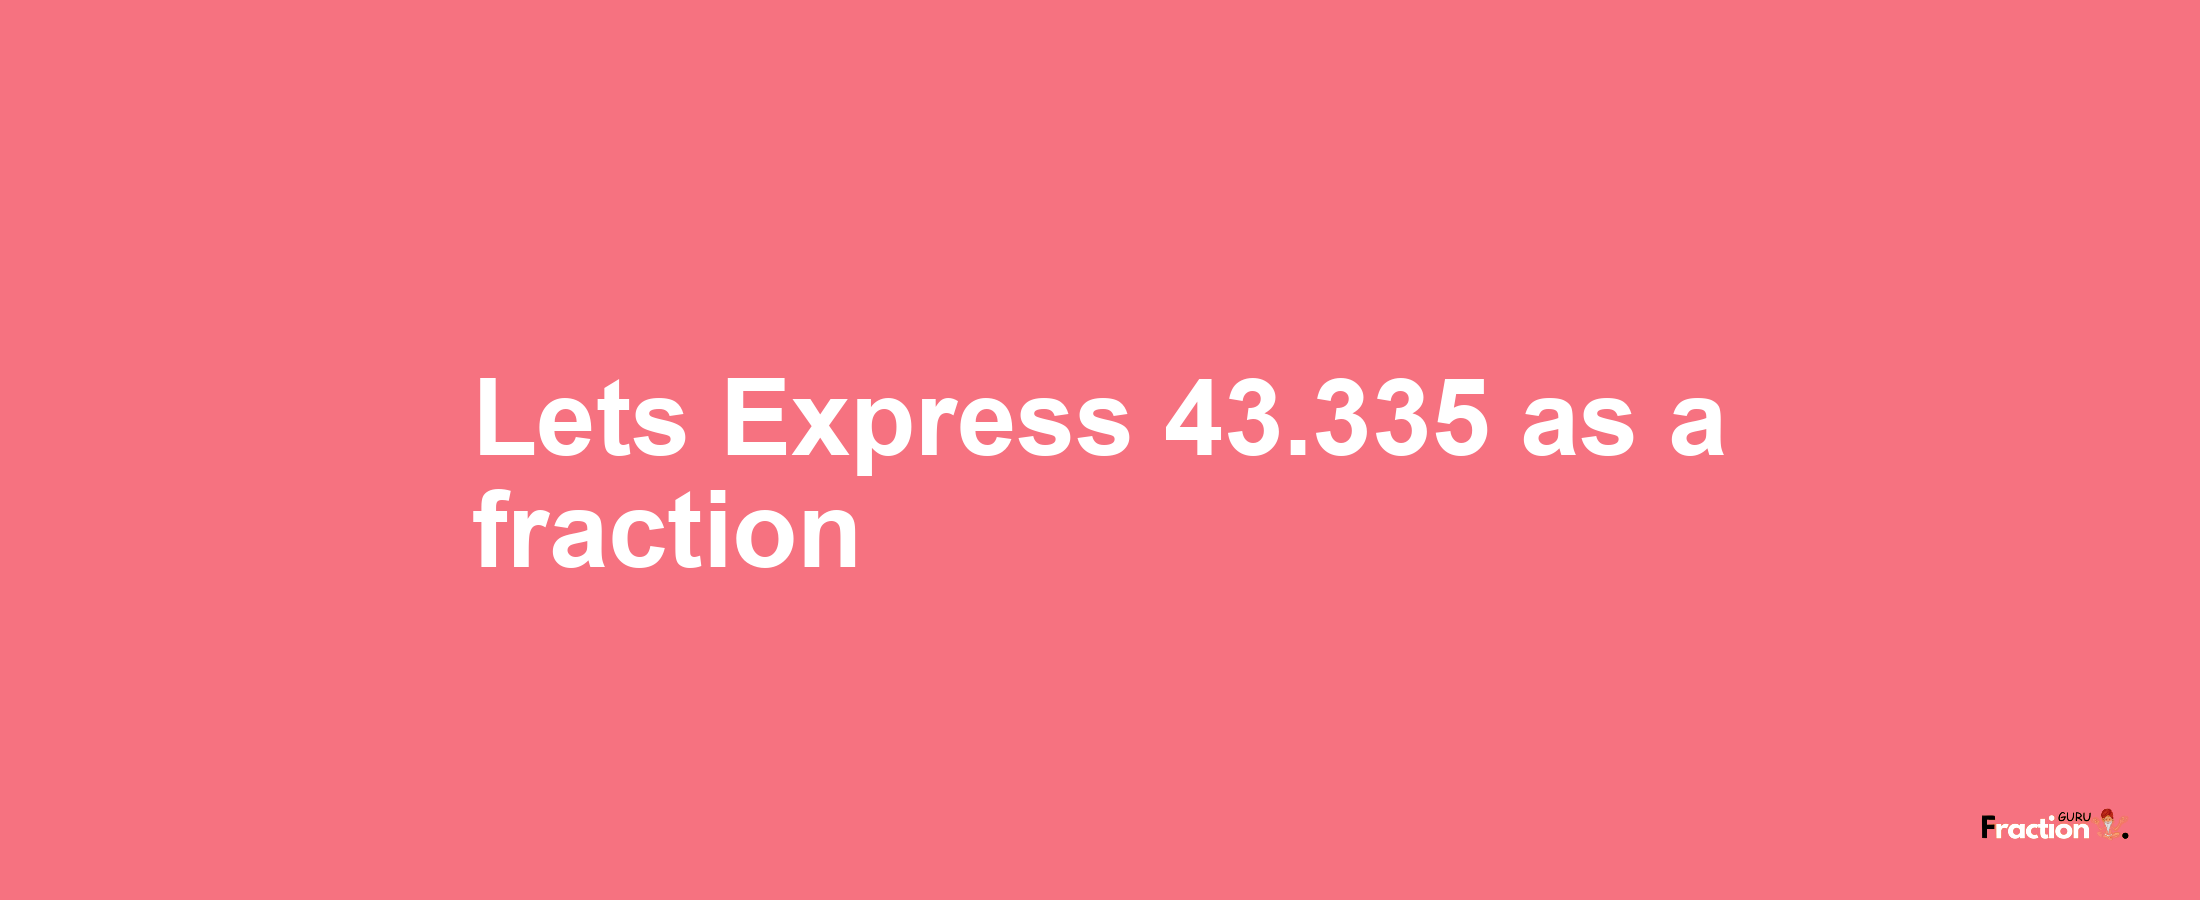 Lets Express 43.335 as afraction